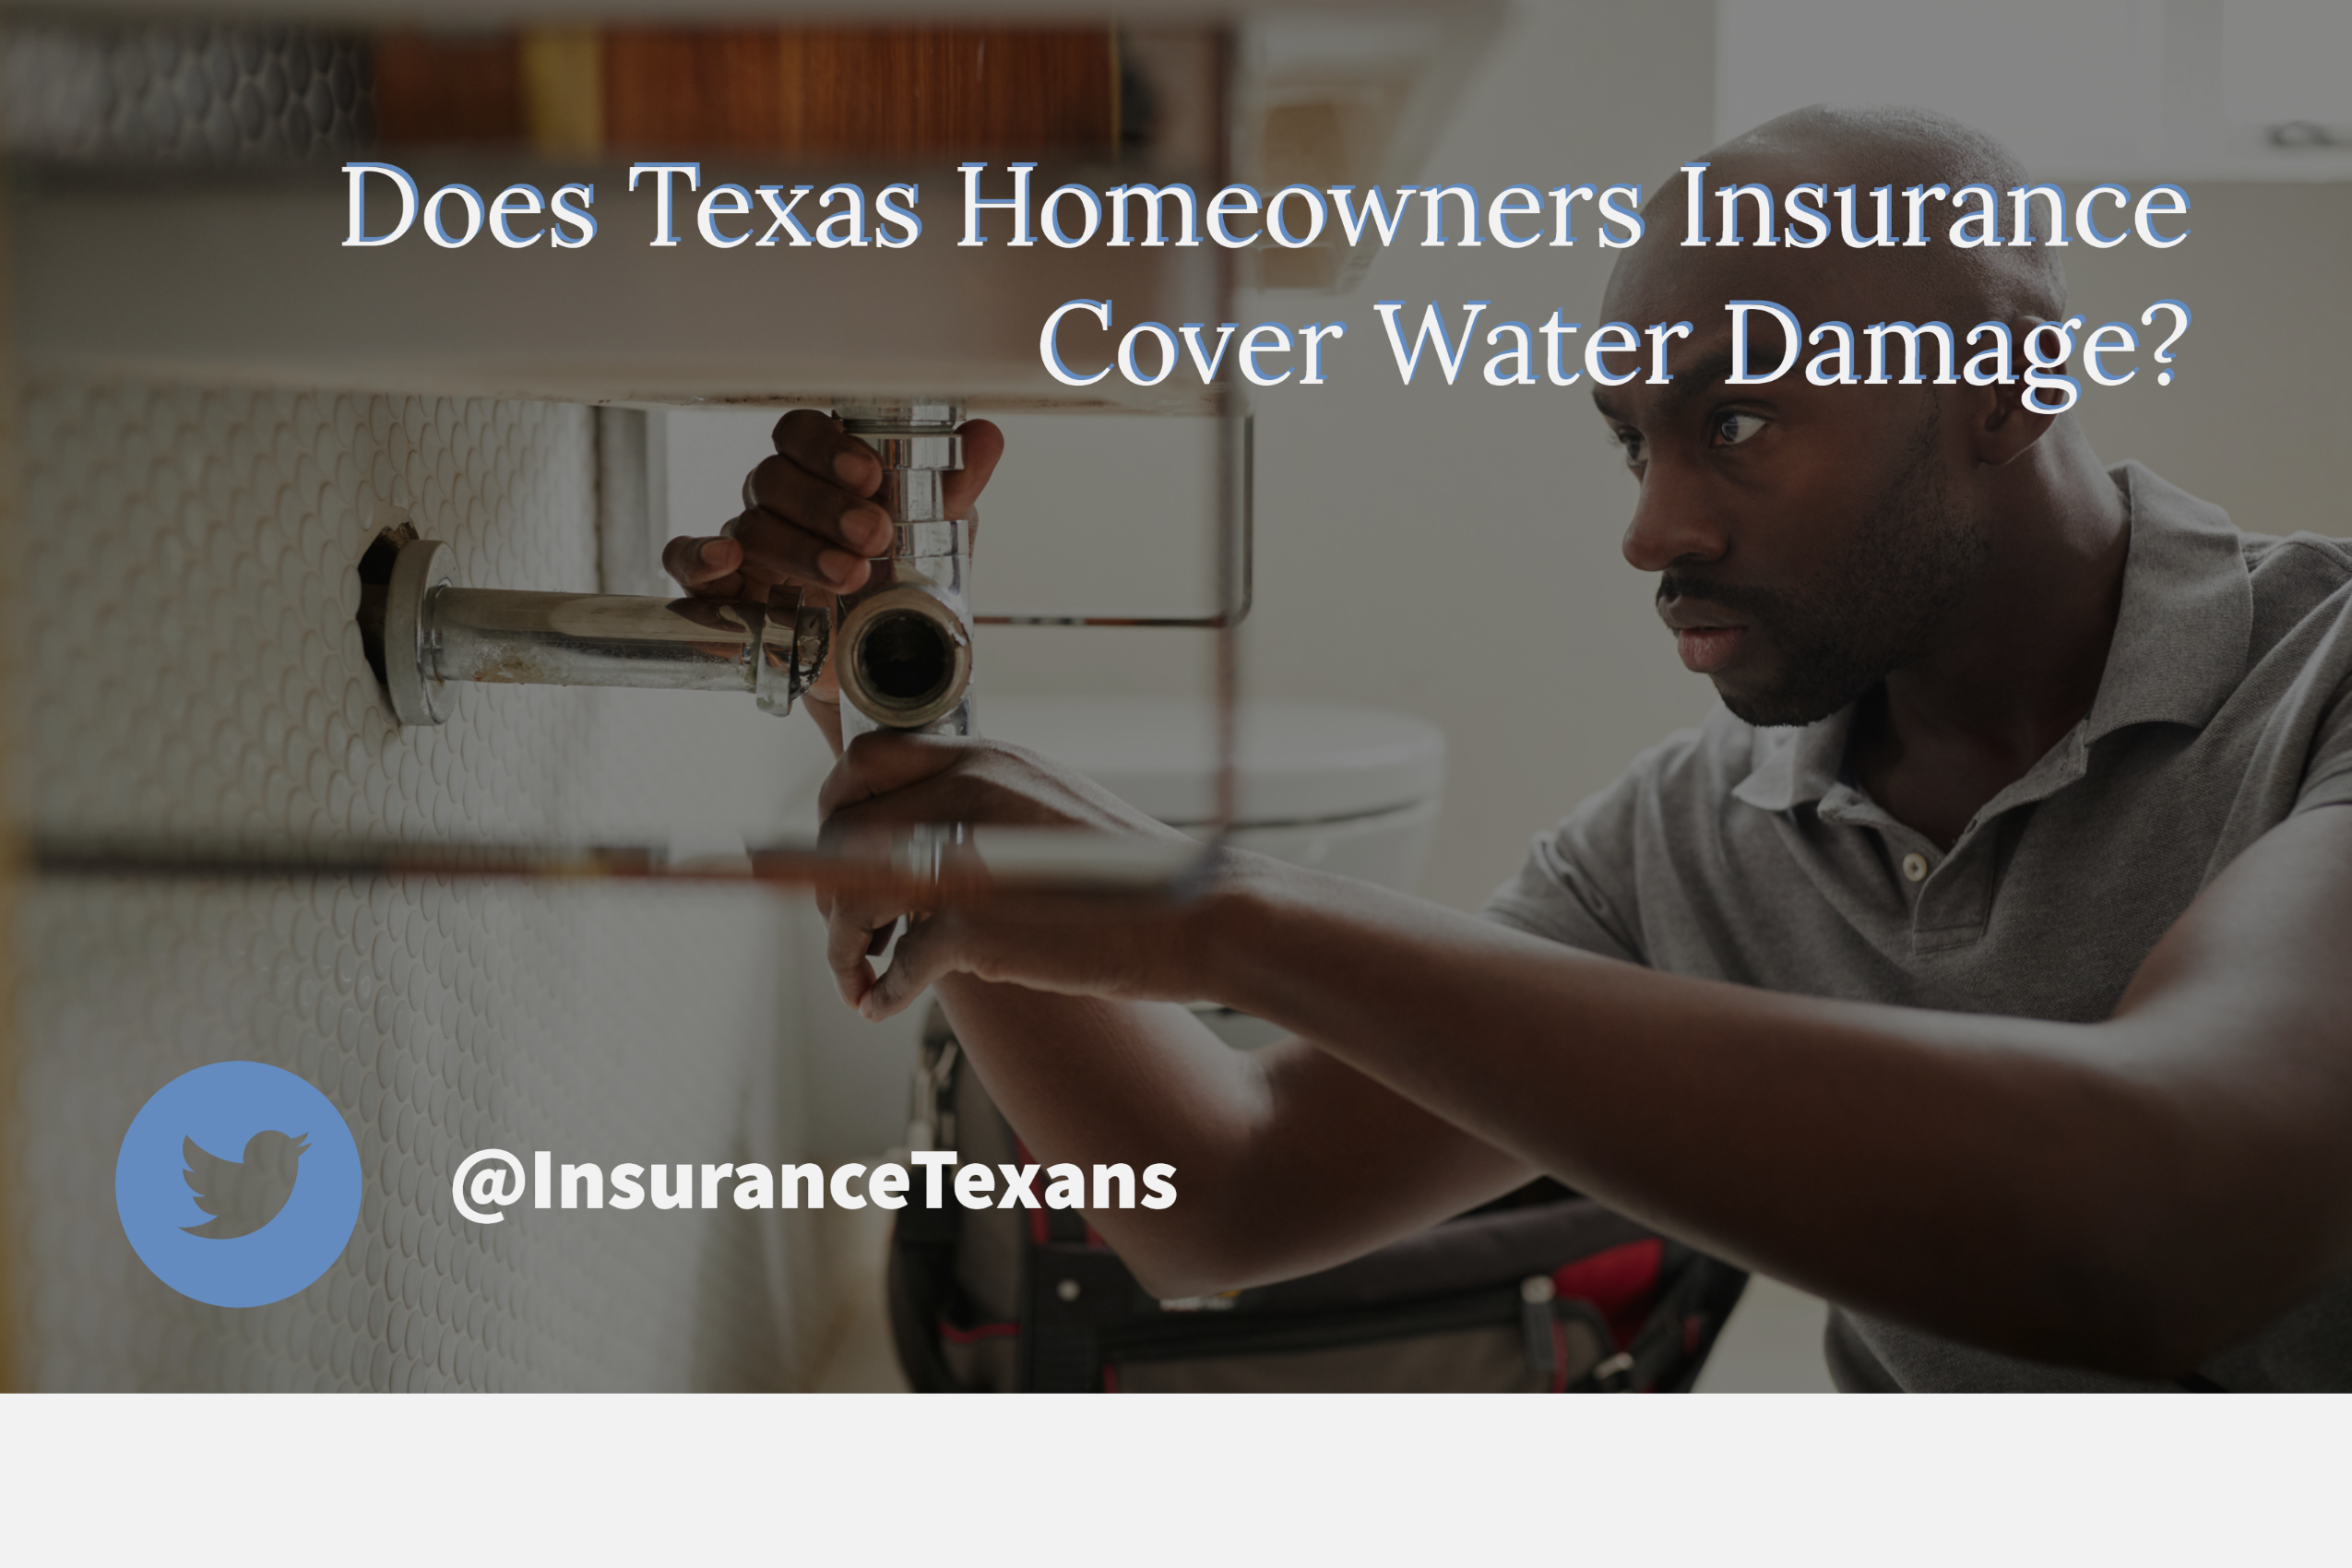 Does Texas Homeowners Insurance Cover Water Damage?